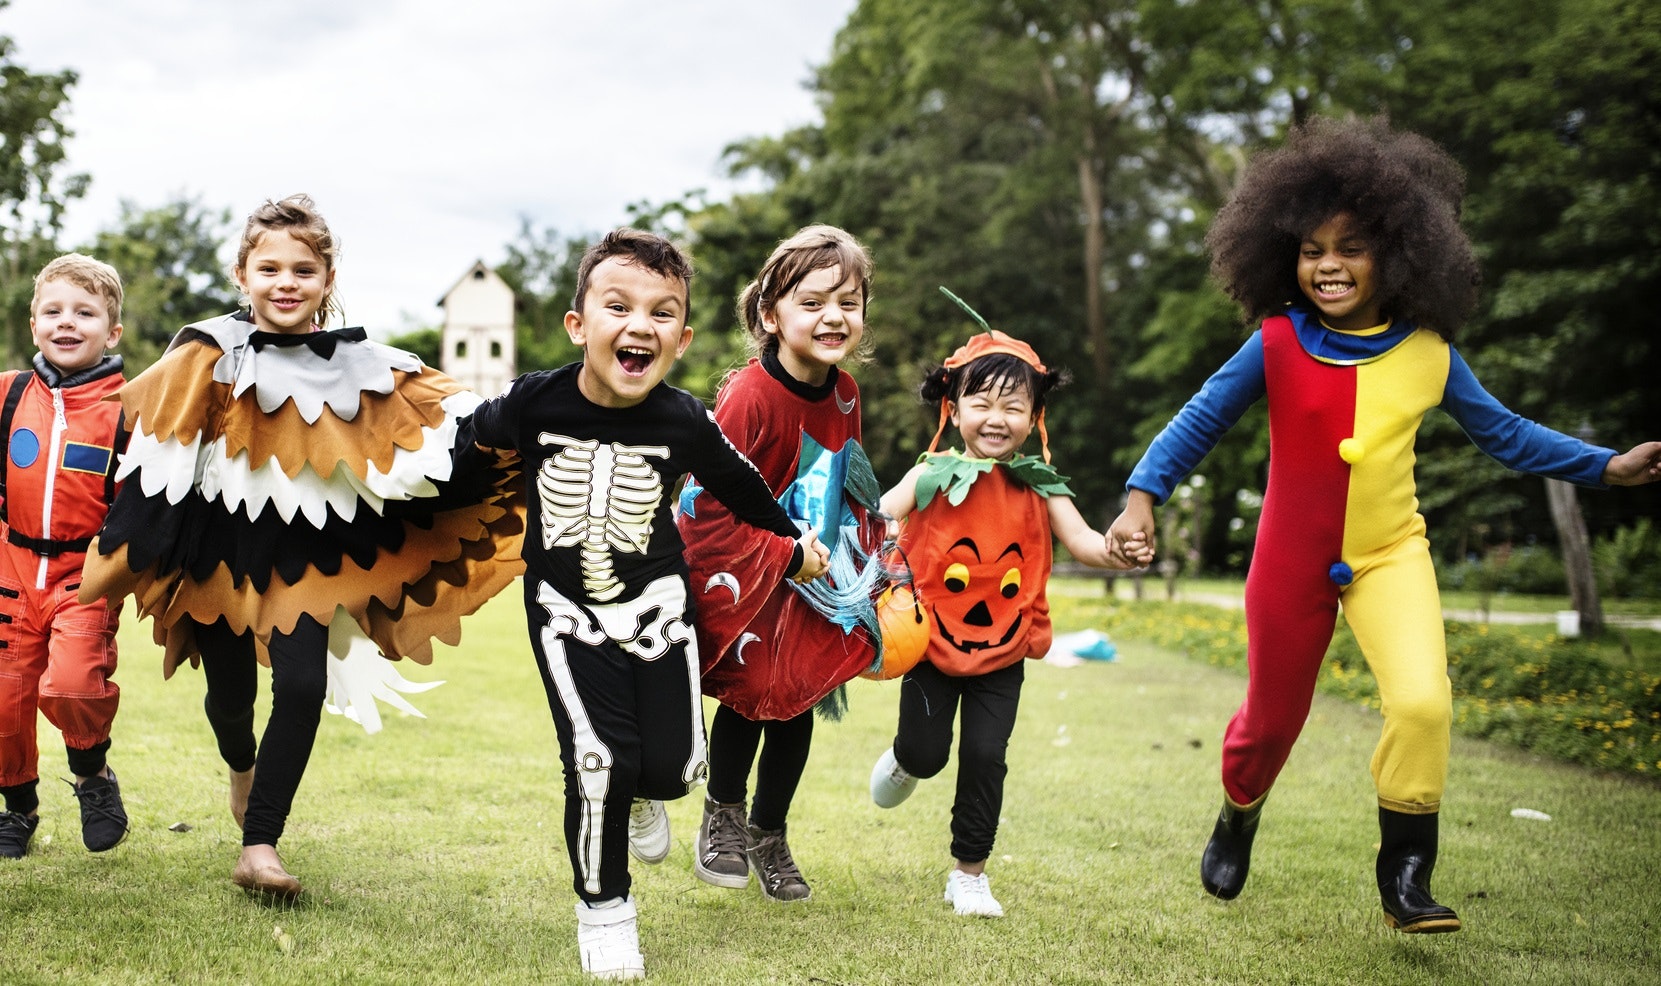 A group of kids running towards the camera wearing Halloween costumes, such as clown, pumpkin, skeleton,. astronaut